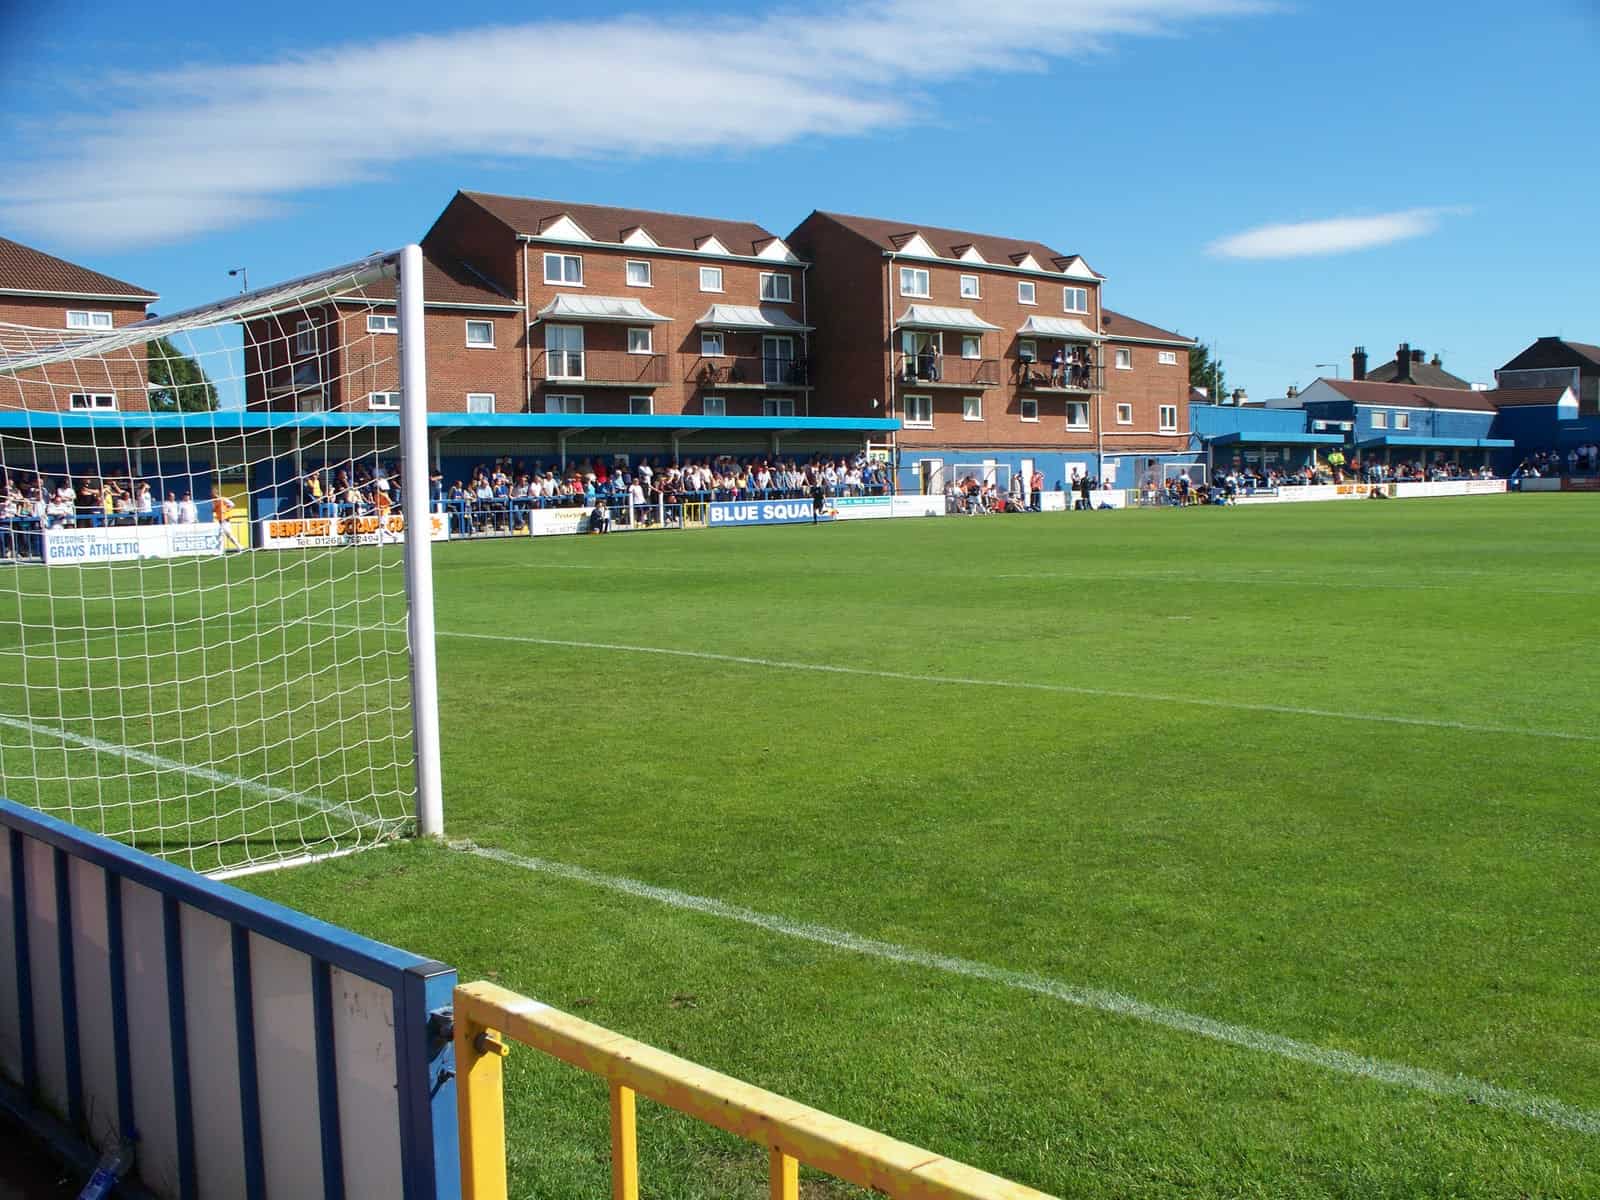 Featured image for “New date for Wroxham away at Grays Athletic”